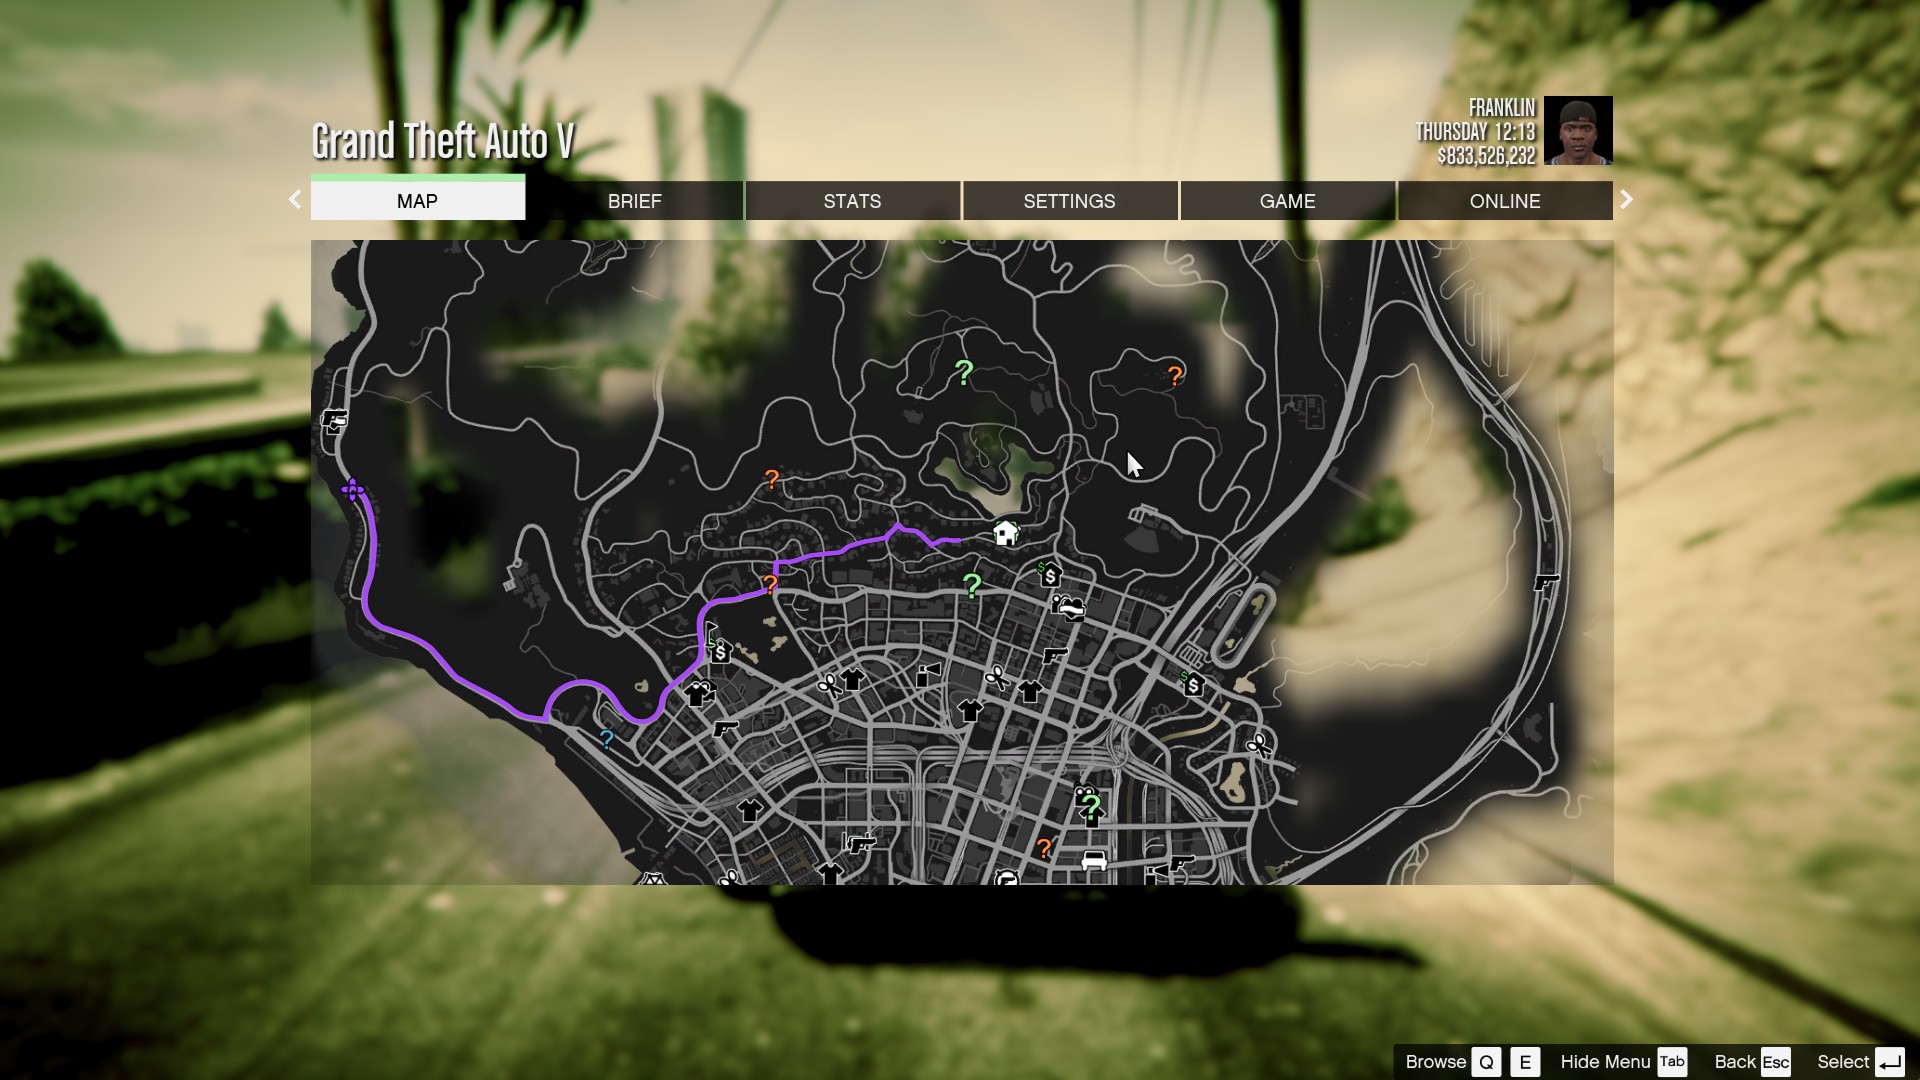 Why won't los Santos customs or ammu nation appear on my map?? Their just  suddenly gone. I've reloaded, turned off the game, everything i could and  still nothing. It's kinda starting to